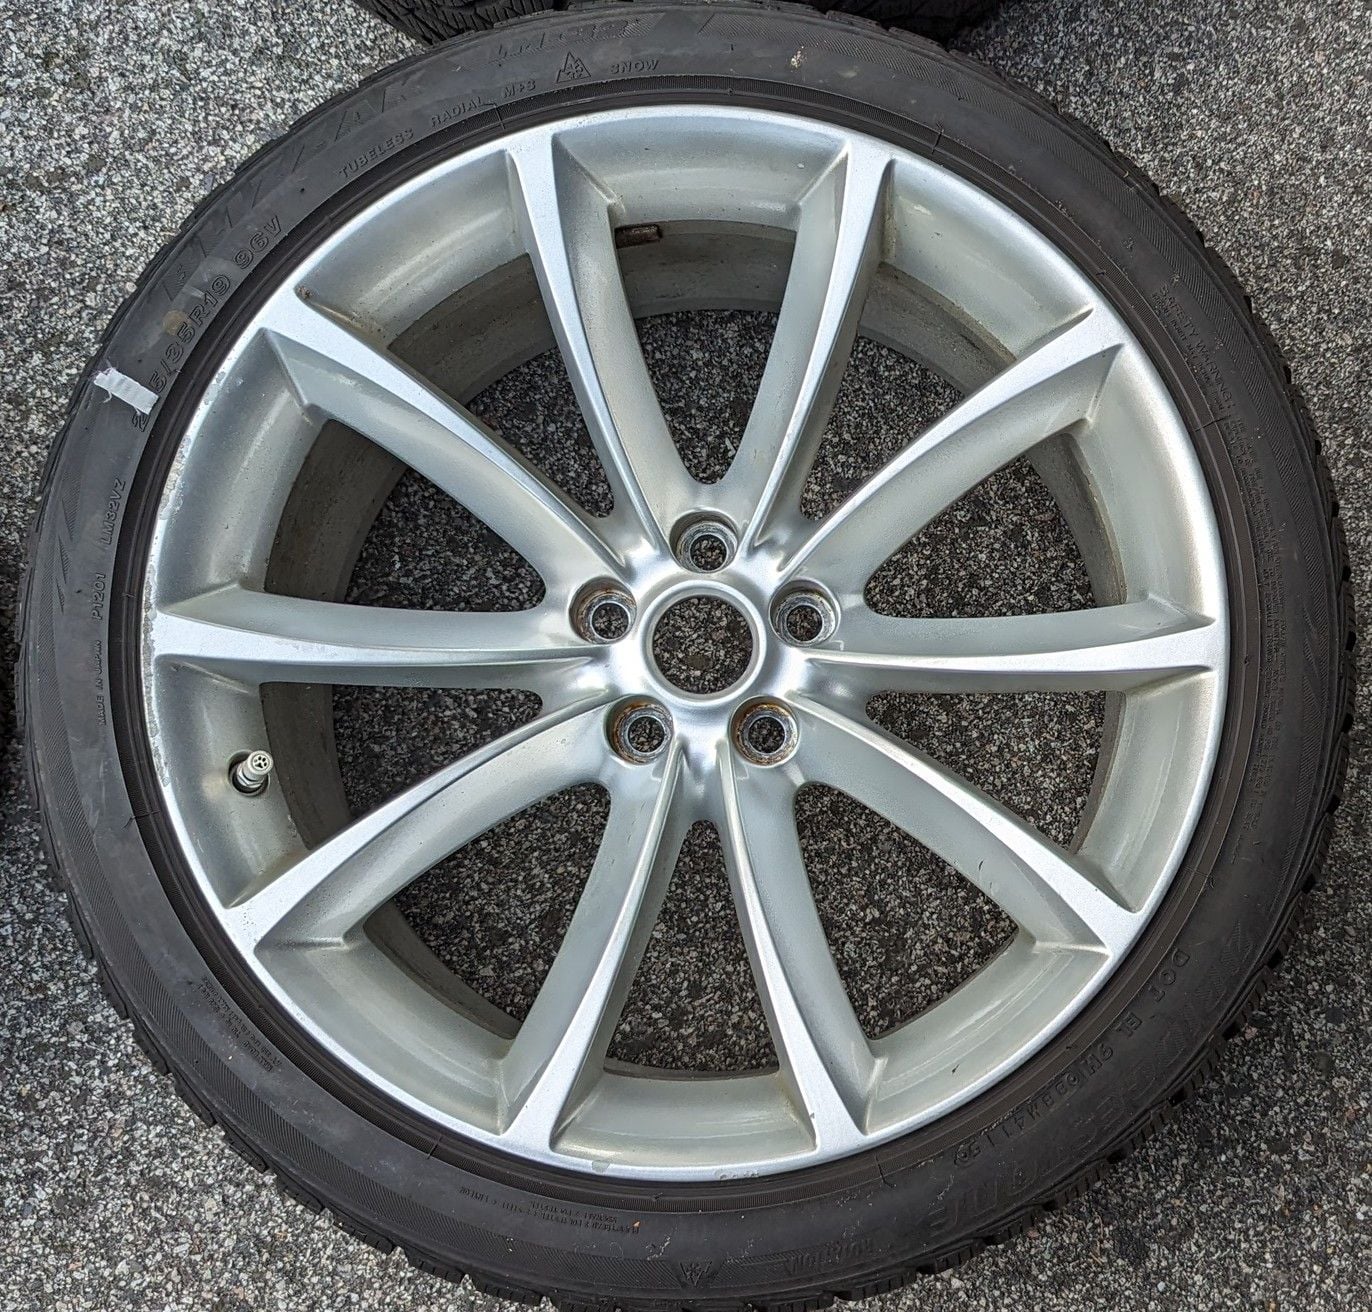 Wheels and Tires/Axles - F type propeller tire wheel set + tires - Used - 2014 to 2019 Jaguar F-Type - Boston, MA 02130, United States